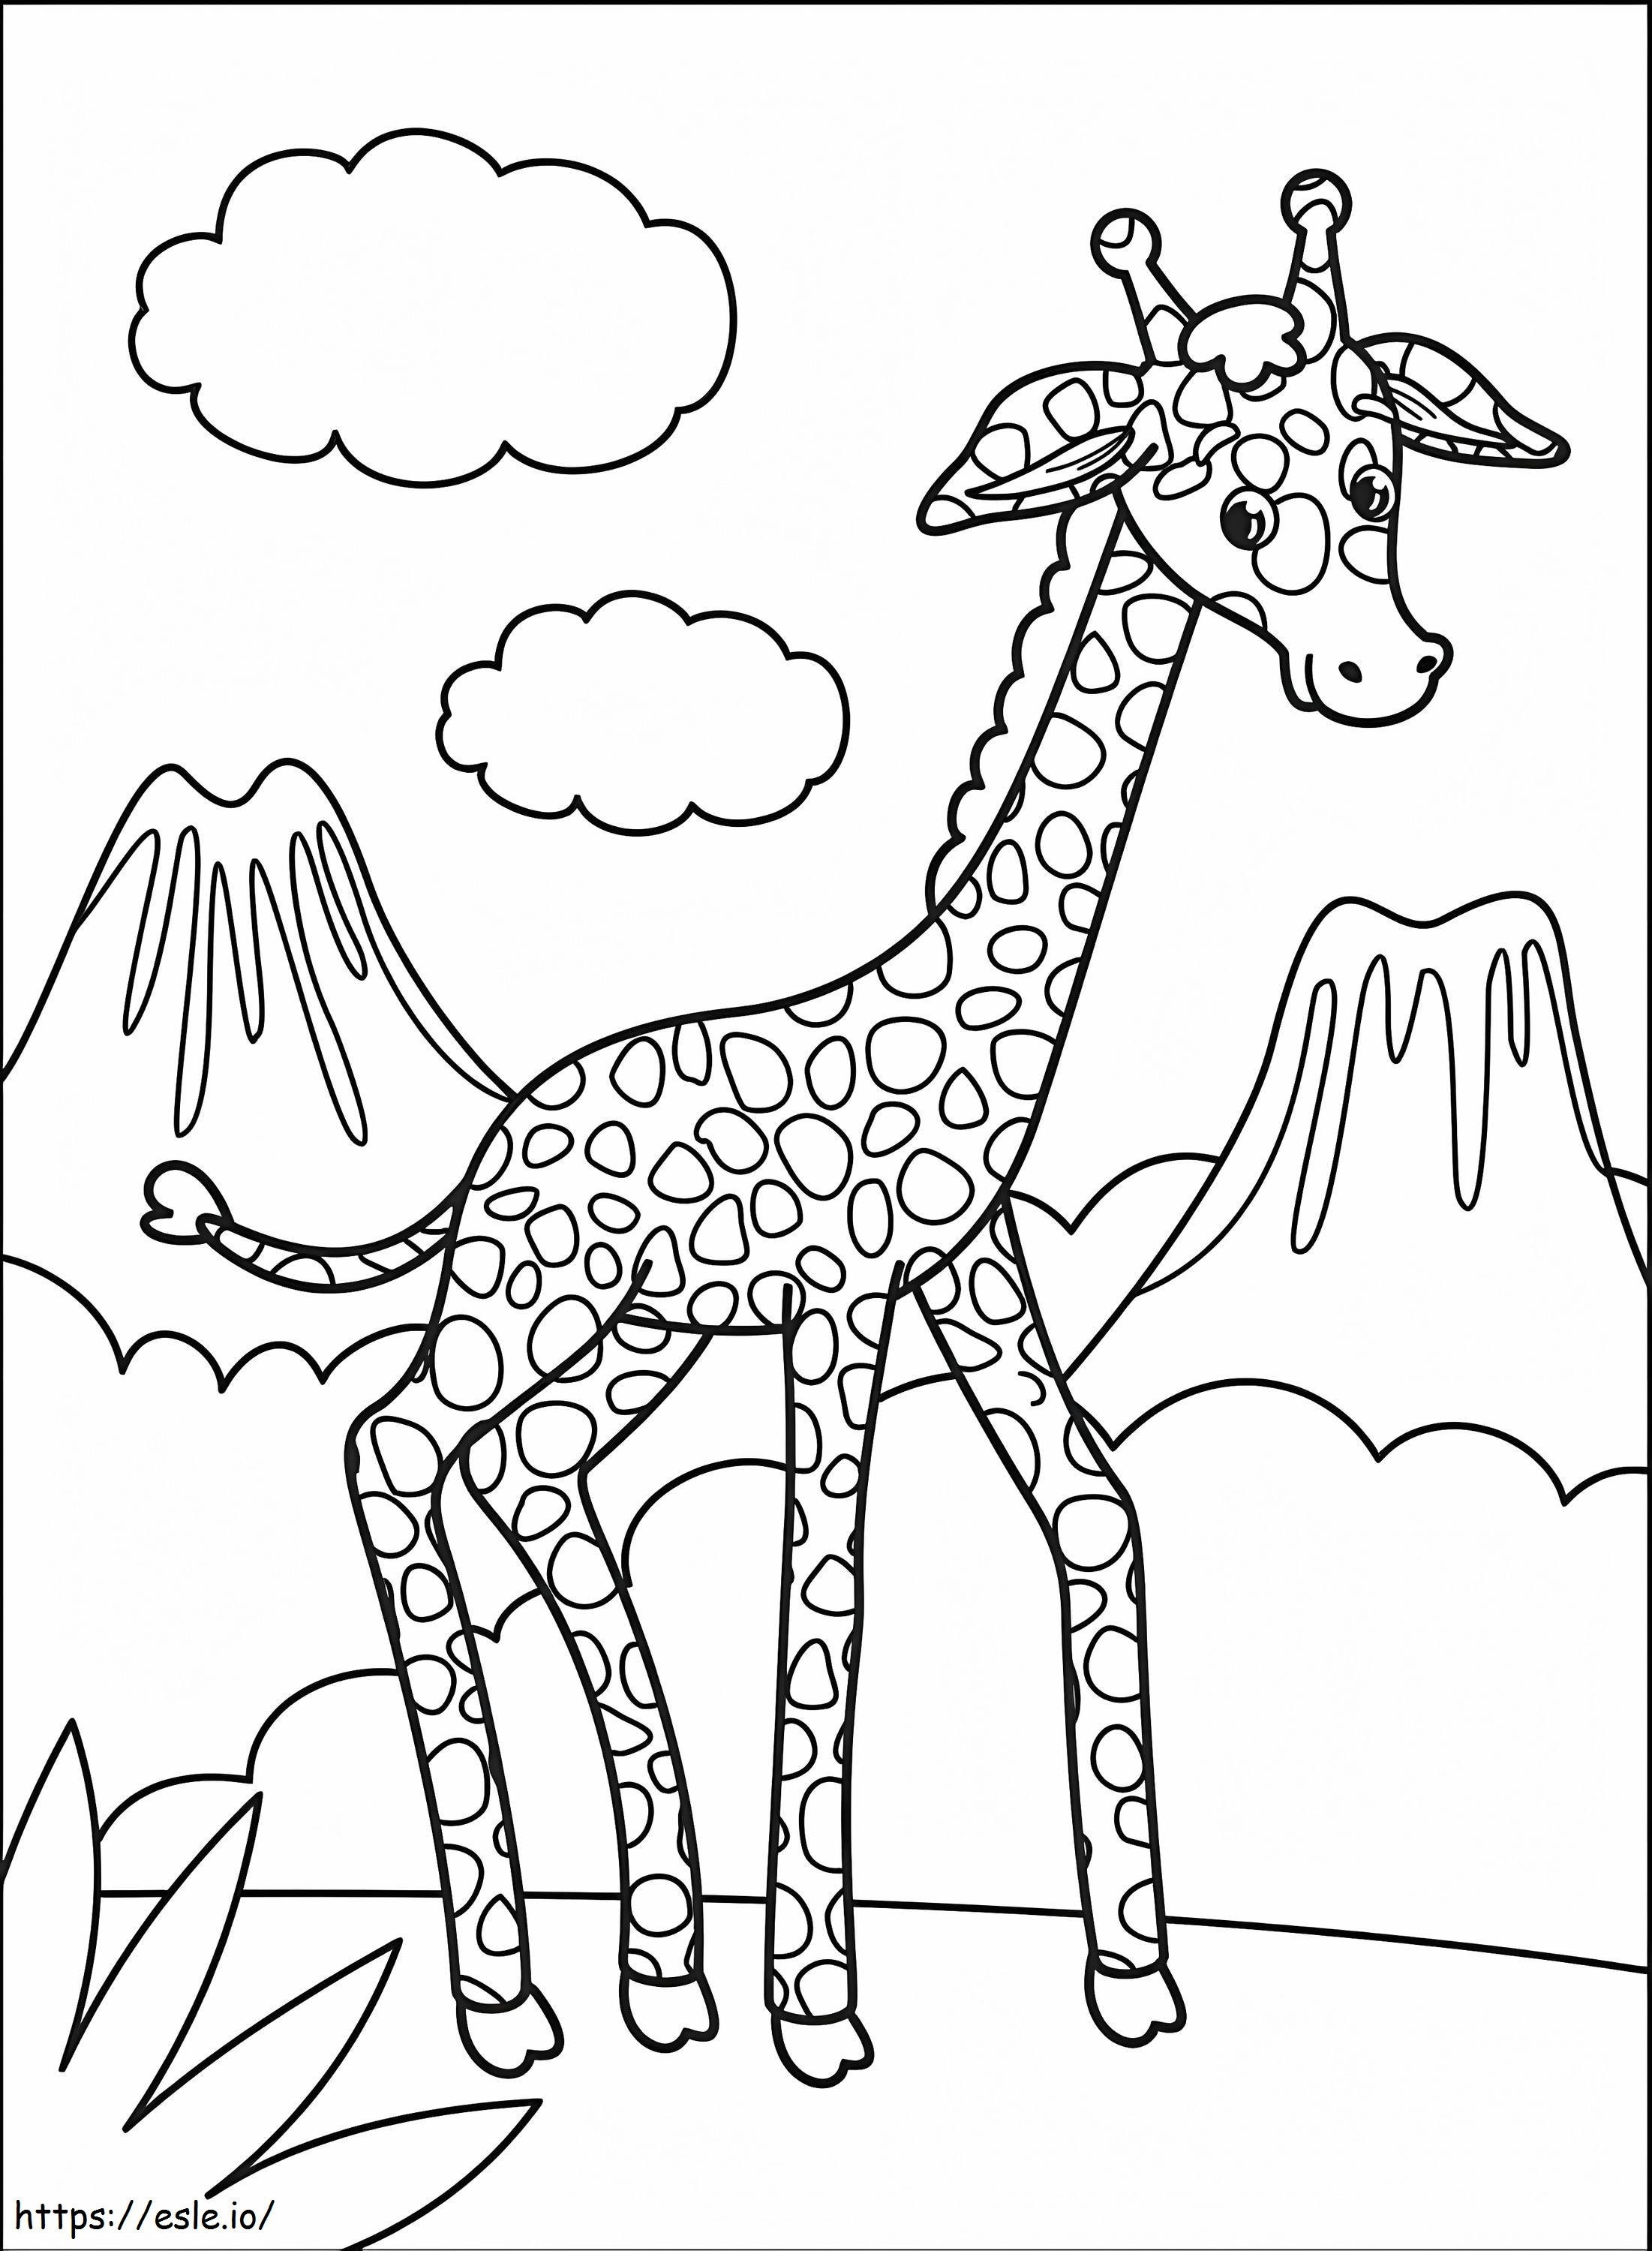 Giraffe Smiling coloring page